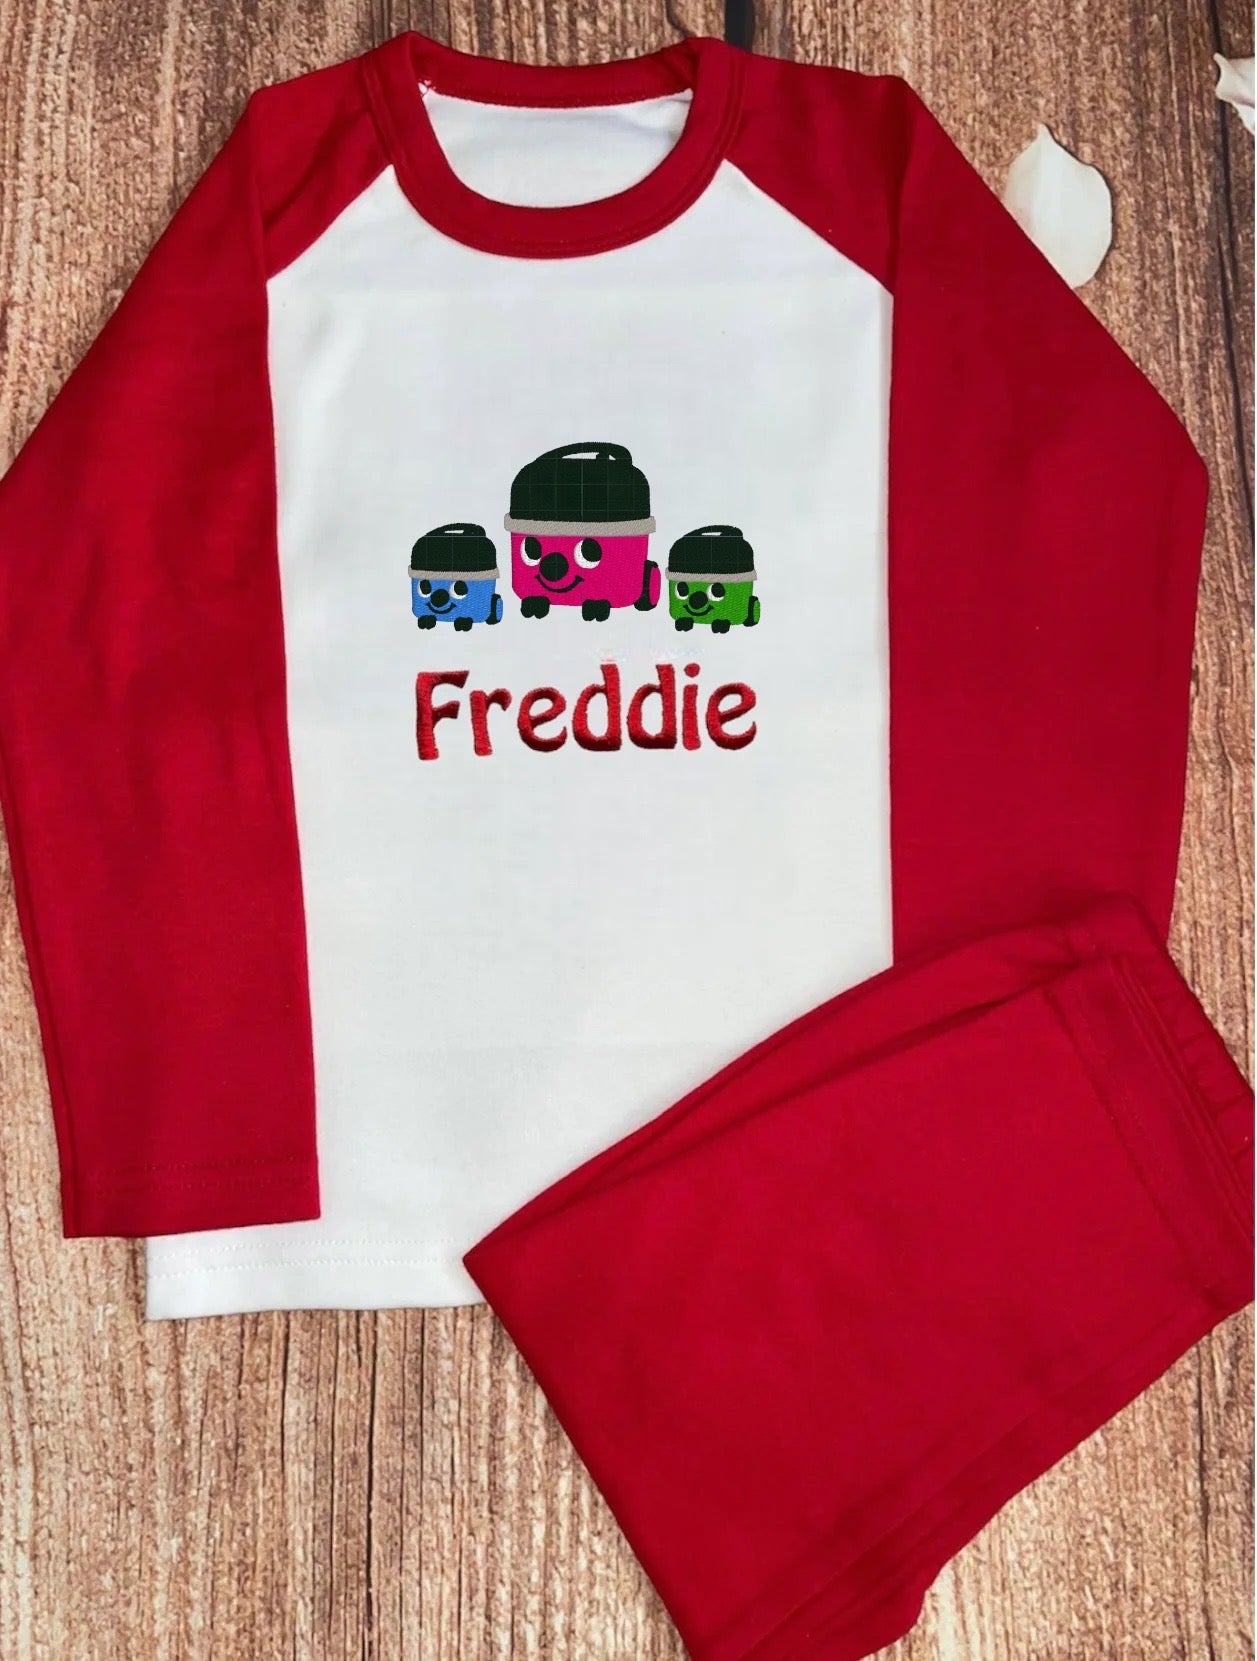 Personalised Pyjamas, embroidered with name & Henry hoover & friends design. Gift, keepsake, high quality, soft, PJ's